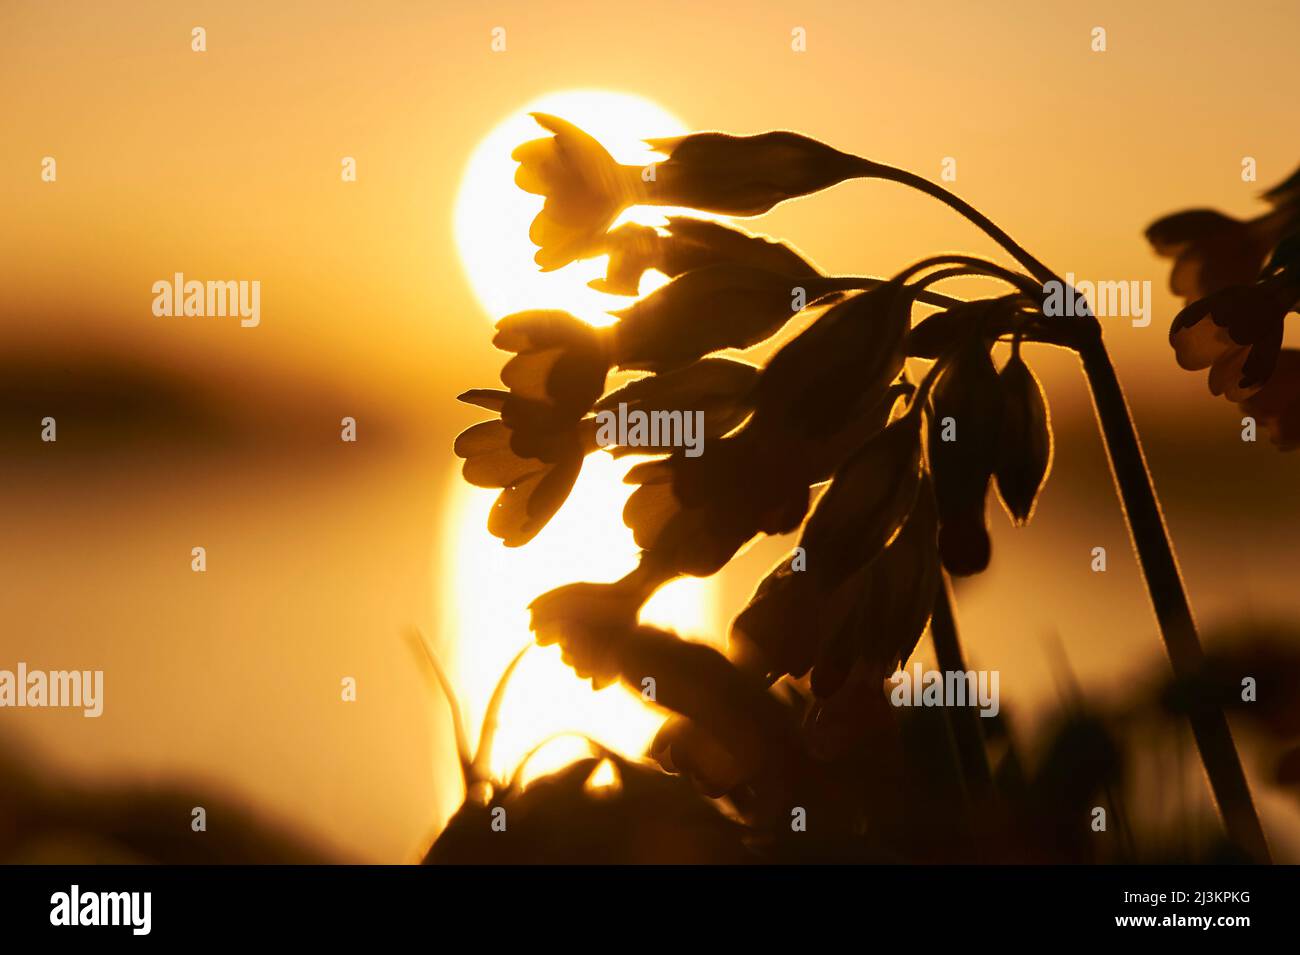 Common cowslip or cowslip primrose (Primula veris) silhouetted at sunset; Bavaria, Germany Stock Photo